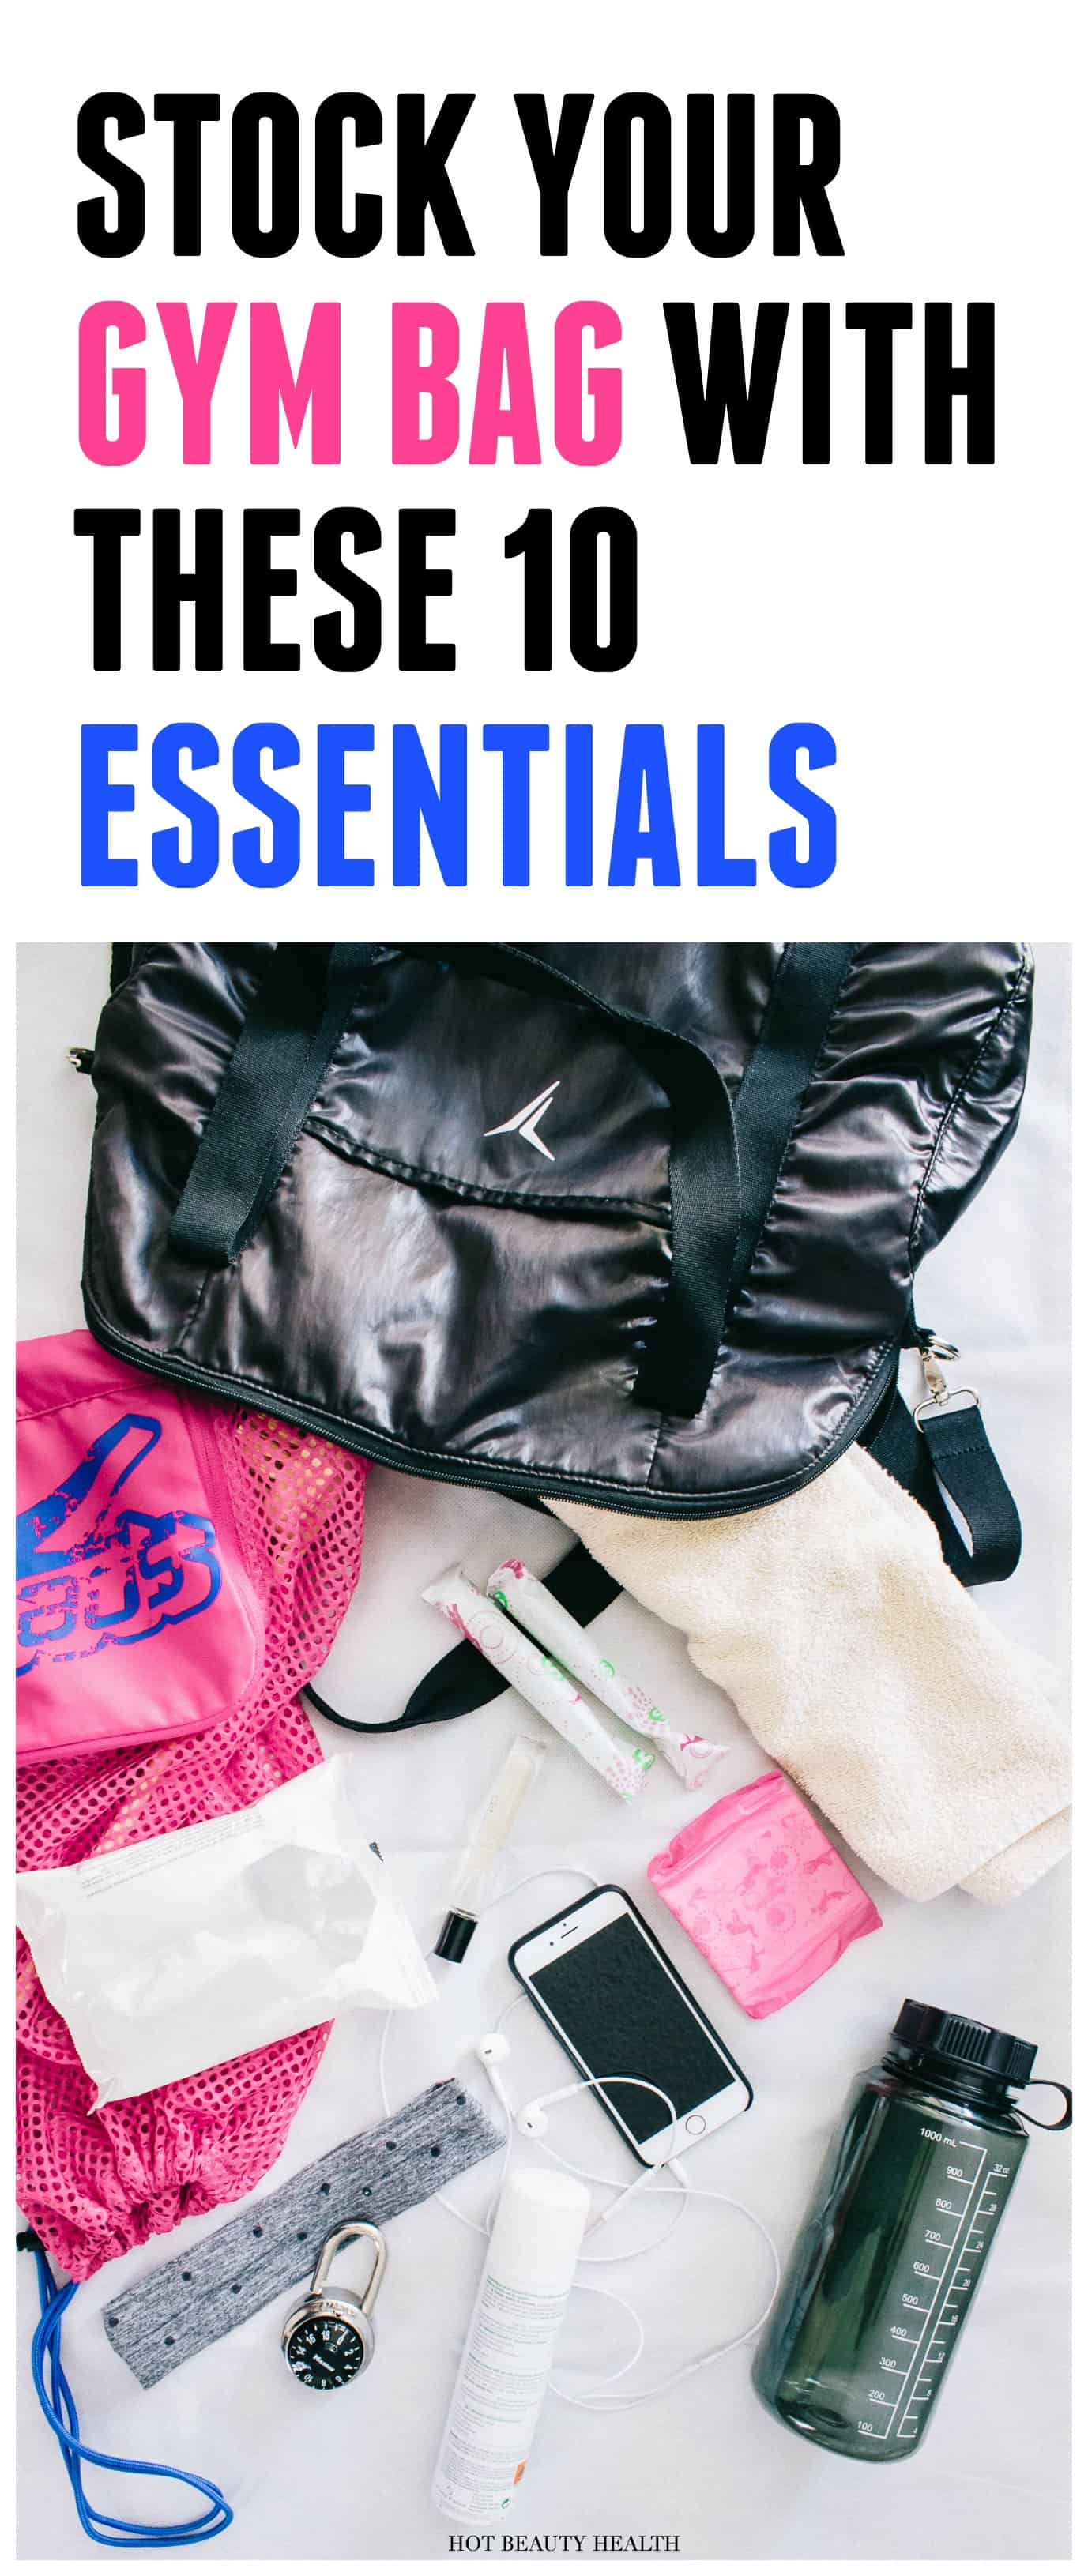 What's In My Gym Bag? Add These 10 Must-Have Essentials